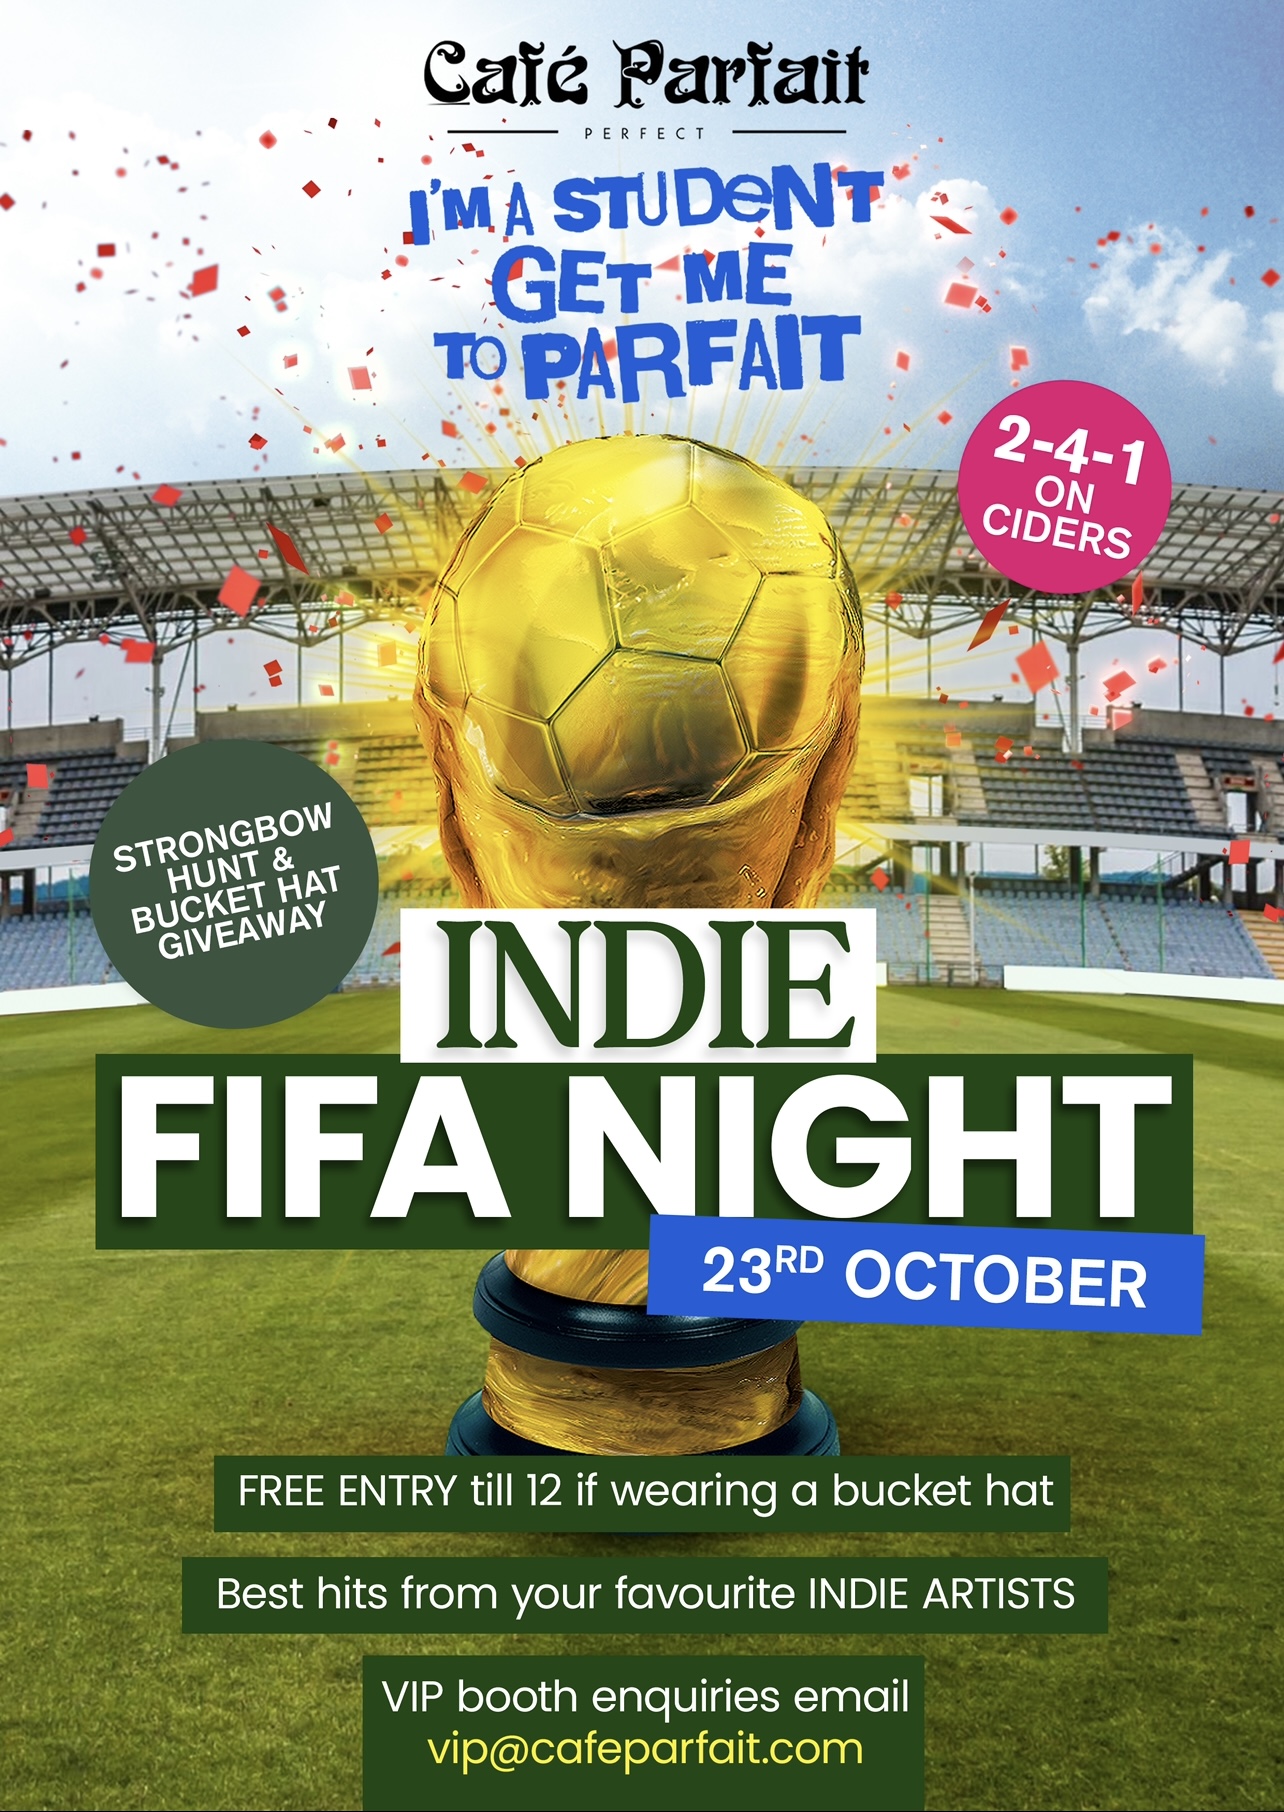 I’m a student get me to parfait : Indie/Fifa Night